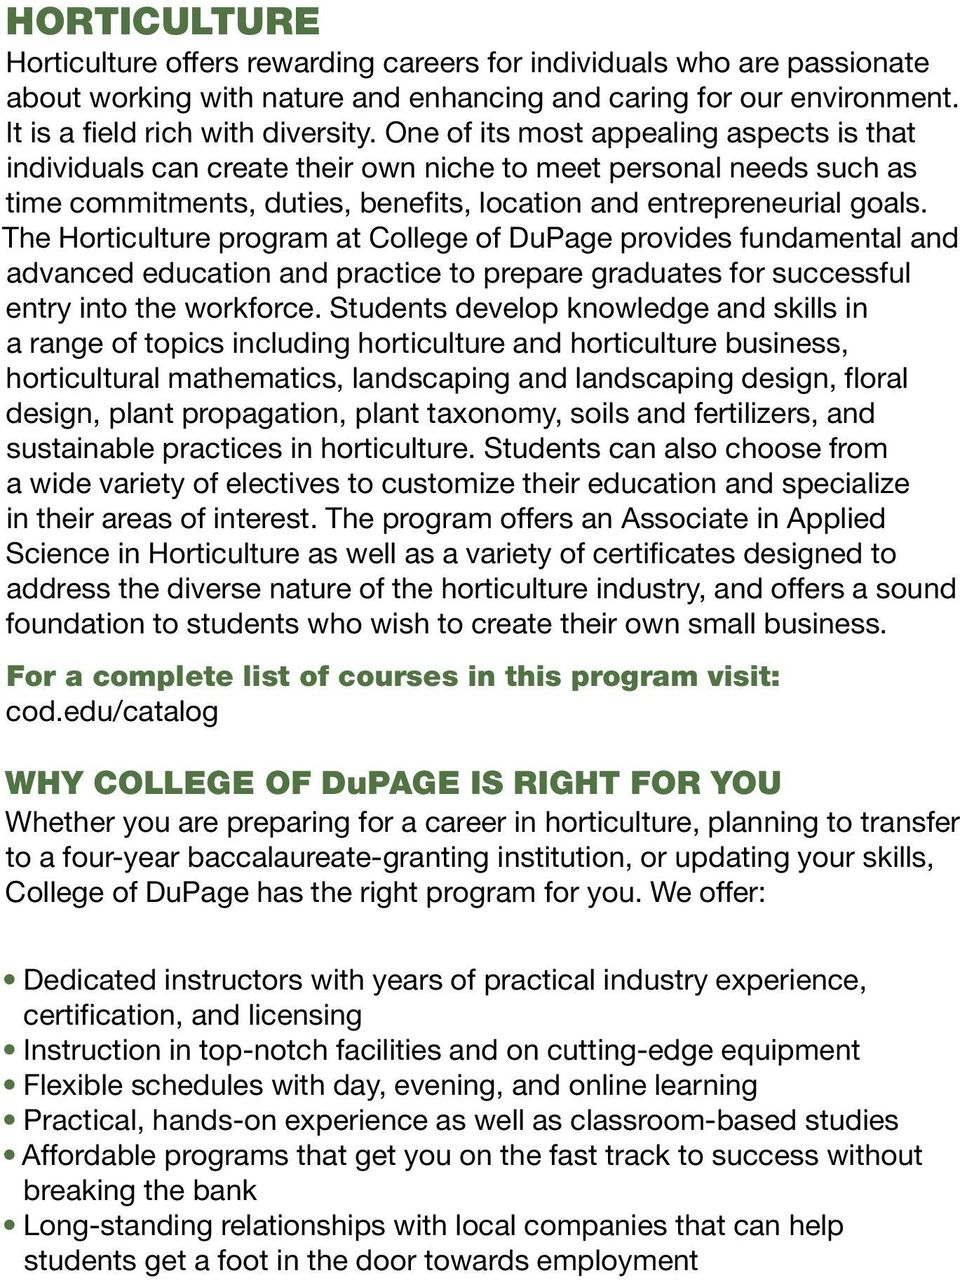 The Horticulture program at College of DuPage provides fundamental and advanced education and practice to prepare graduates for successful entry into the workforce.